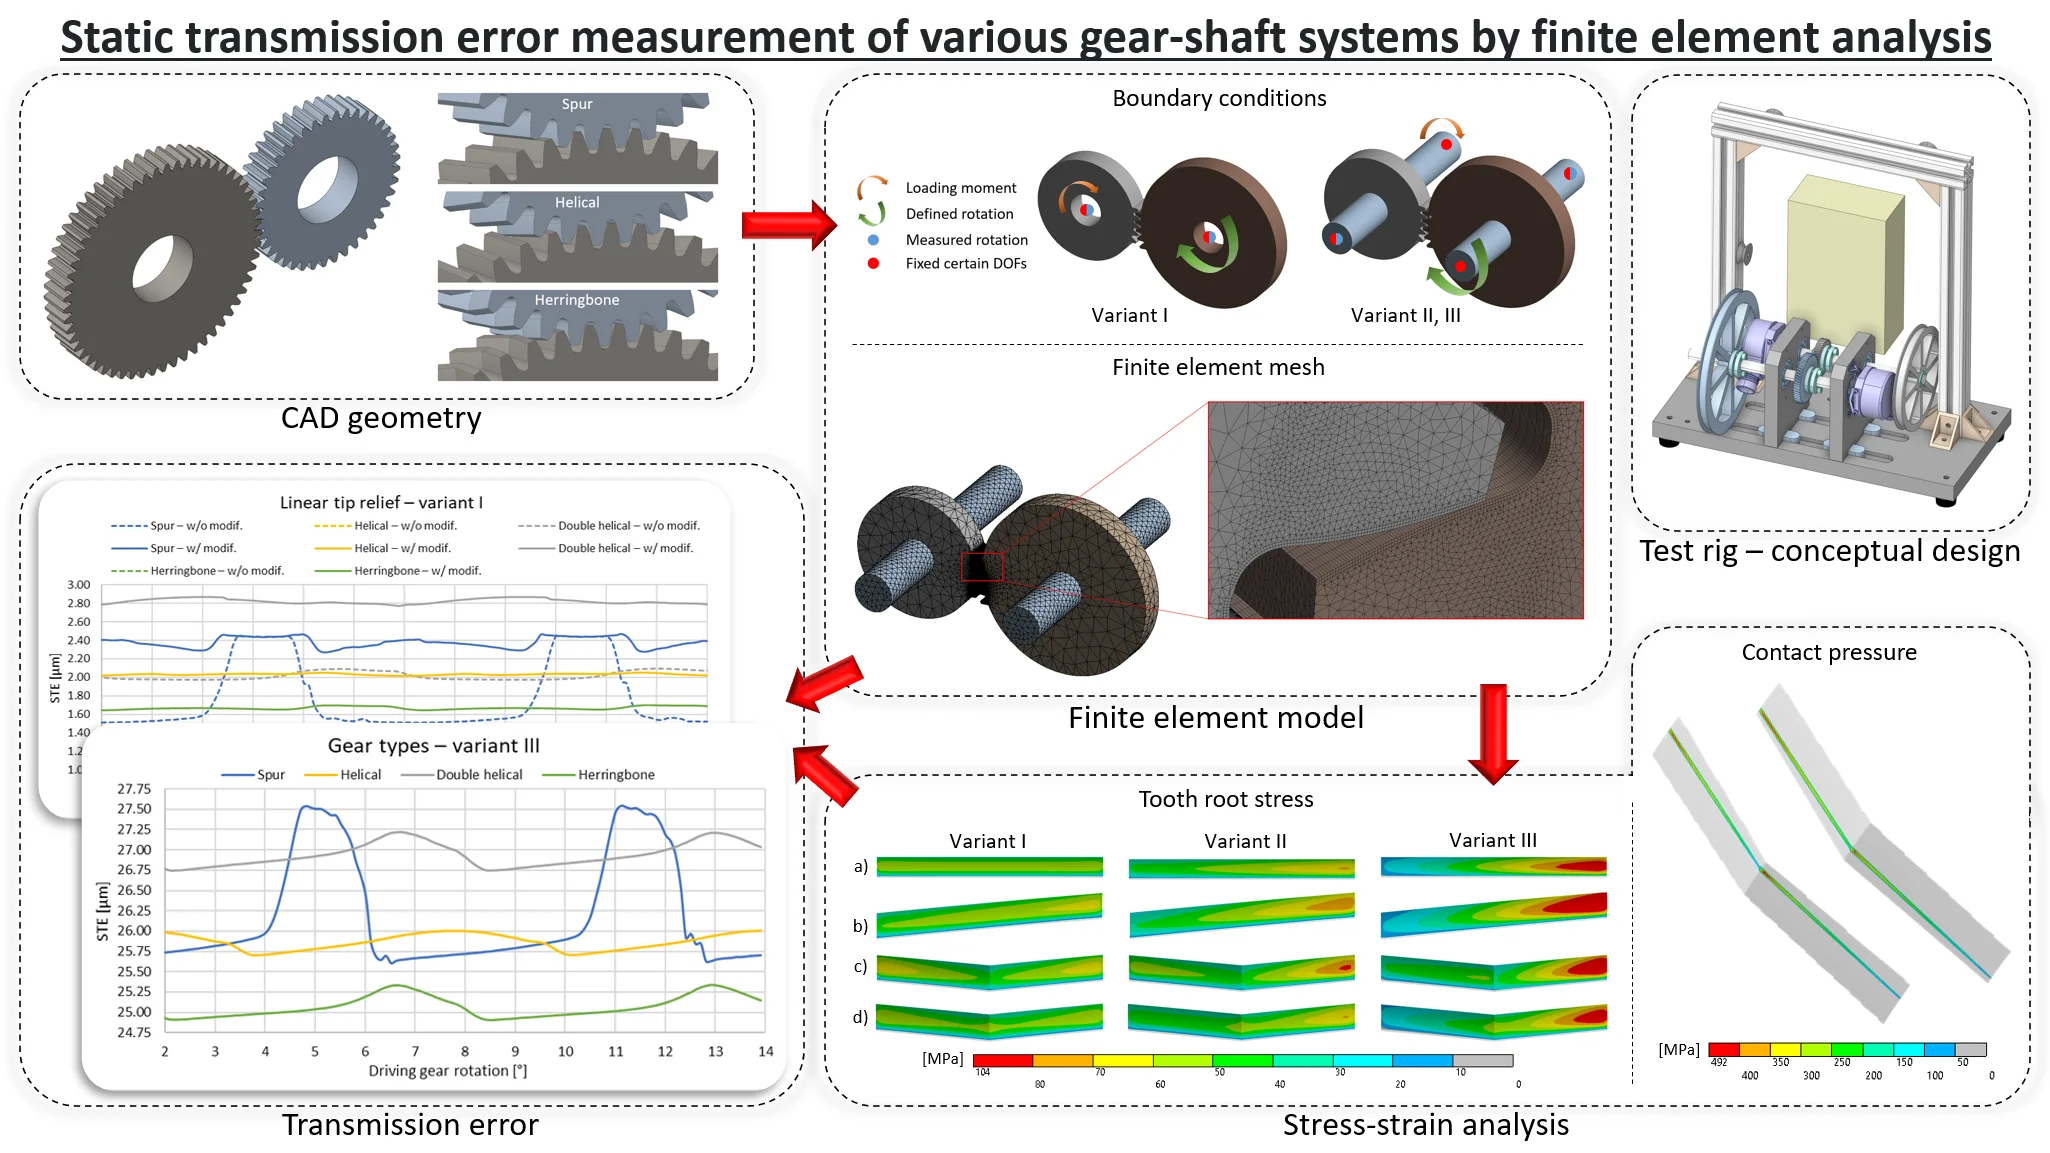 Static transmission error measurement of various gear-shaft systems by finite element analysis